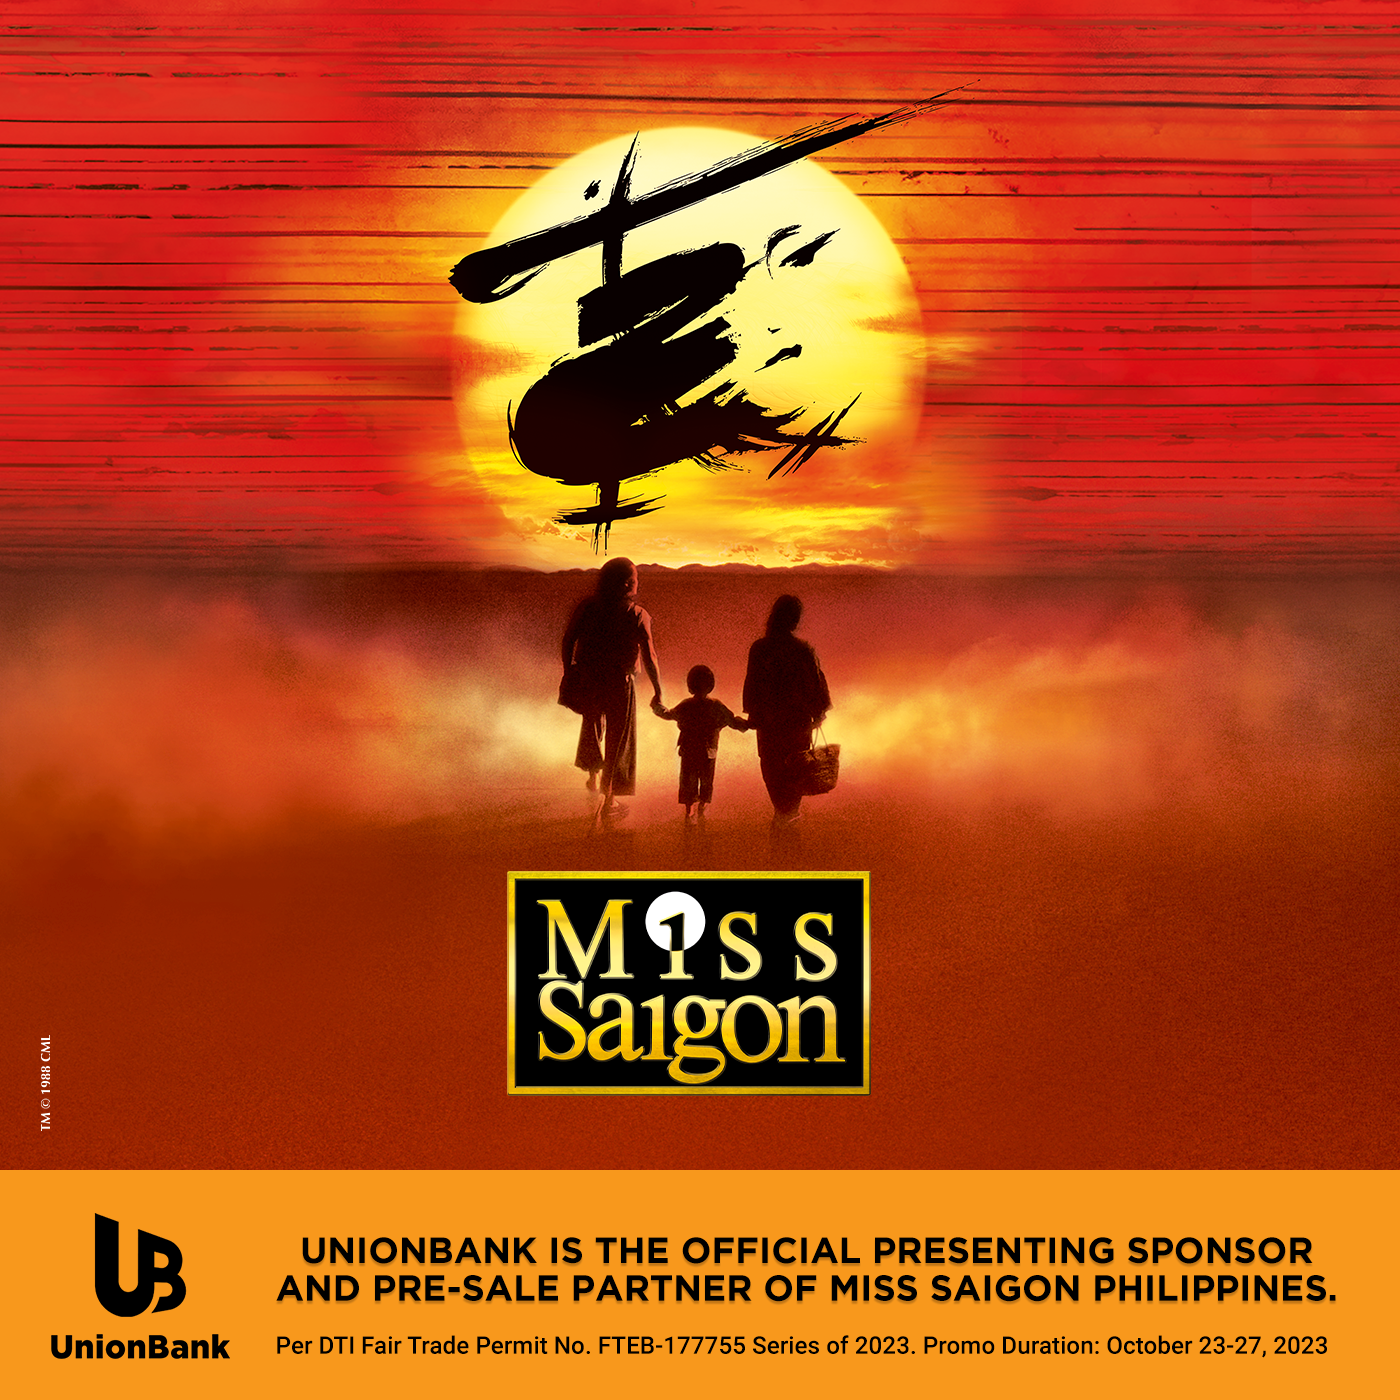 Manila, the Heat is On!UnionBank Cardholders Get Pre-Sale Access for Miss Saigon Tickets